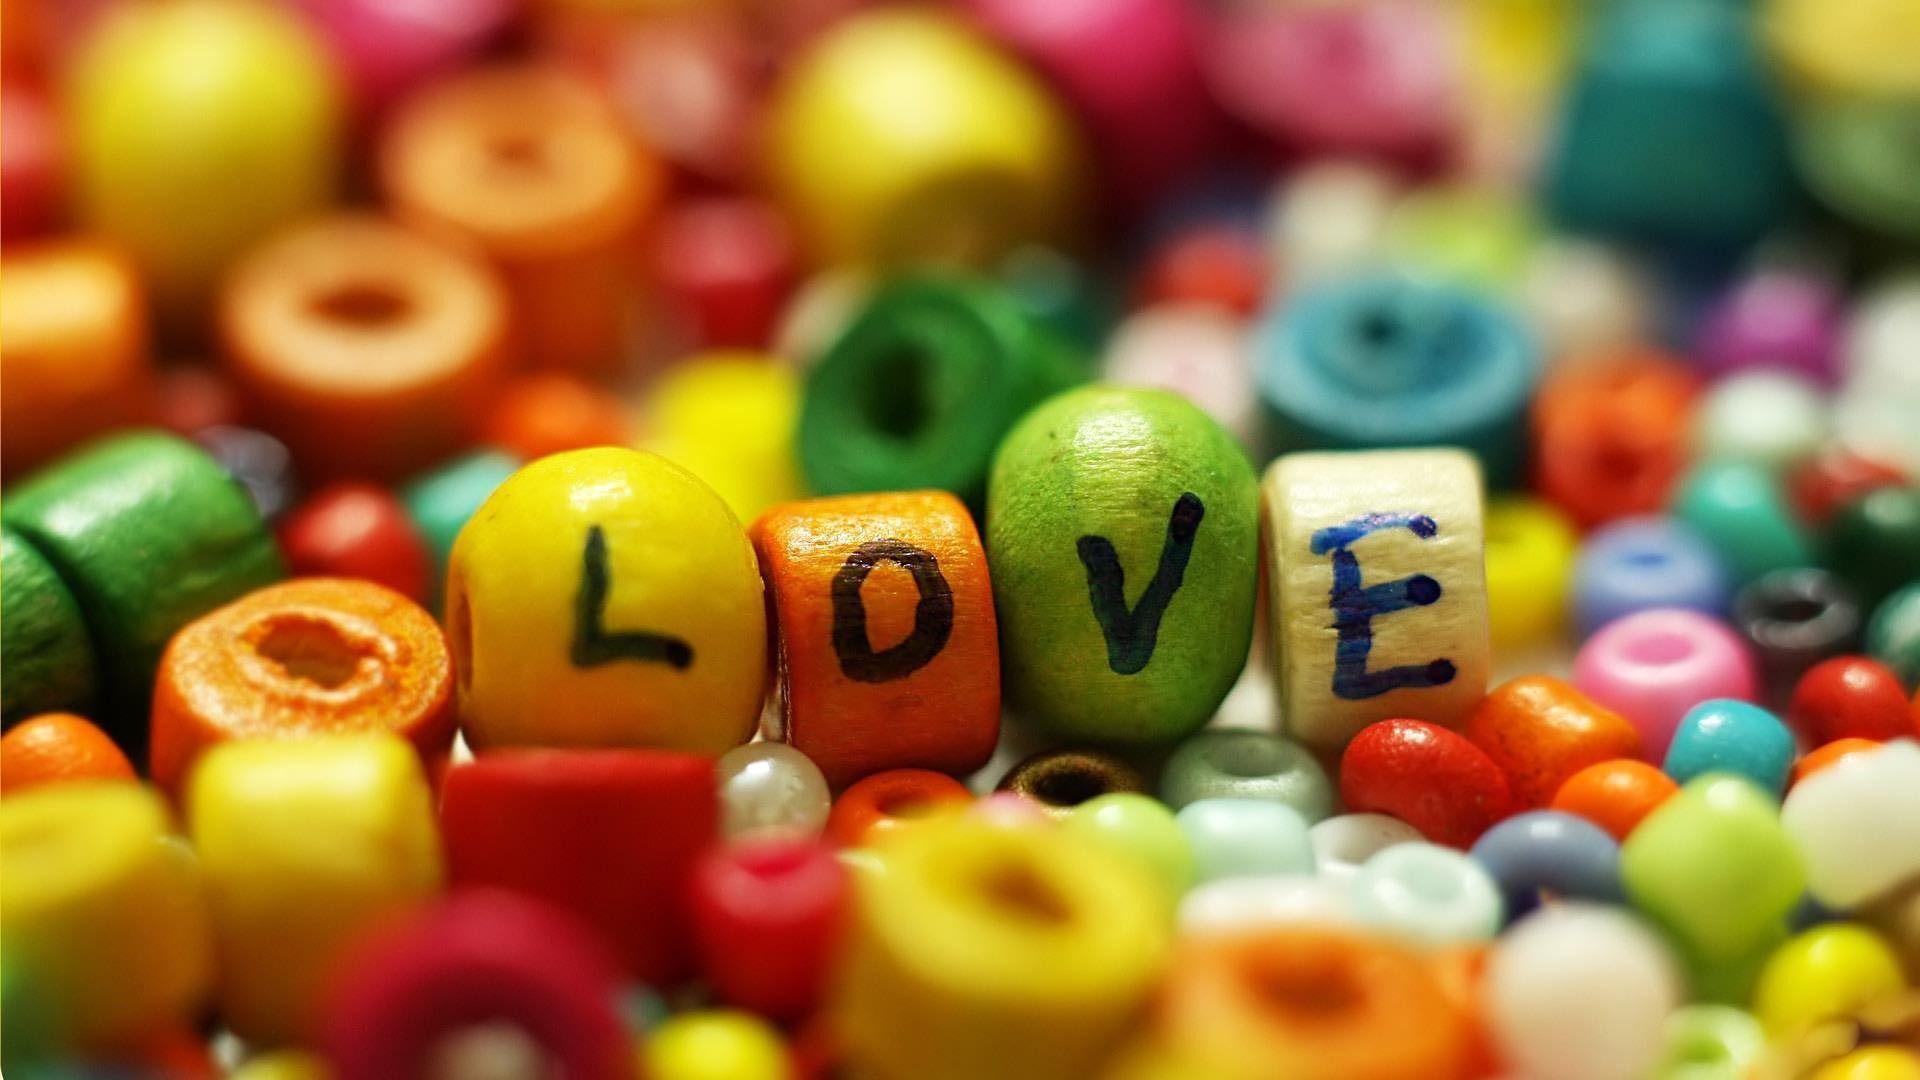 Colorful Sweet Love For Romantic Person Wallpaper In HD, Free